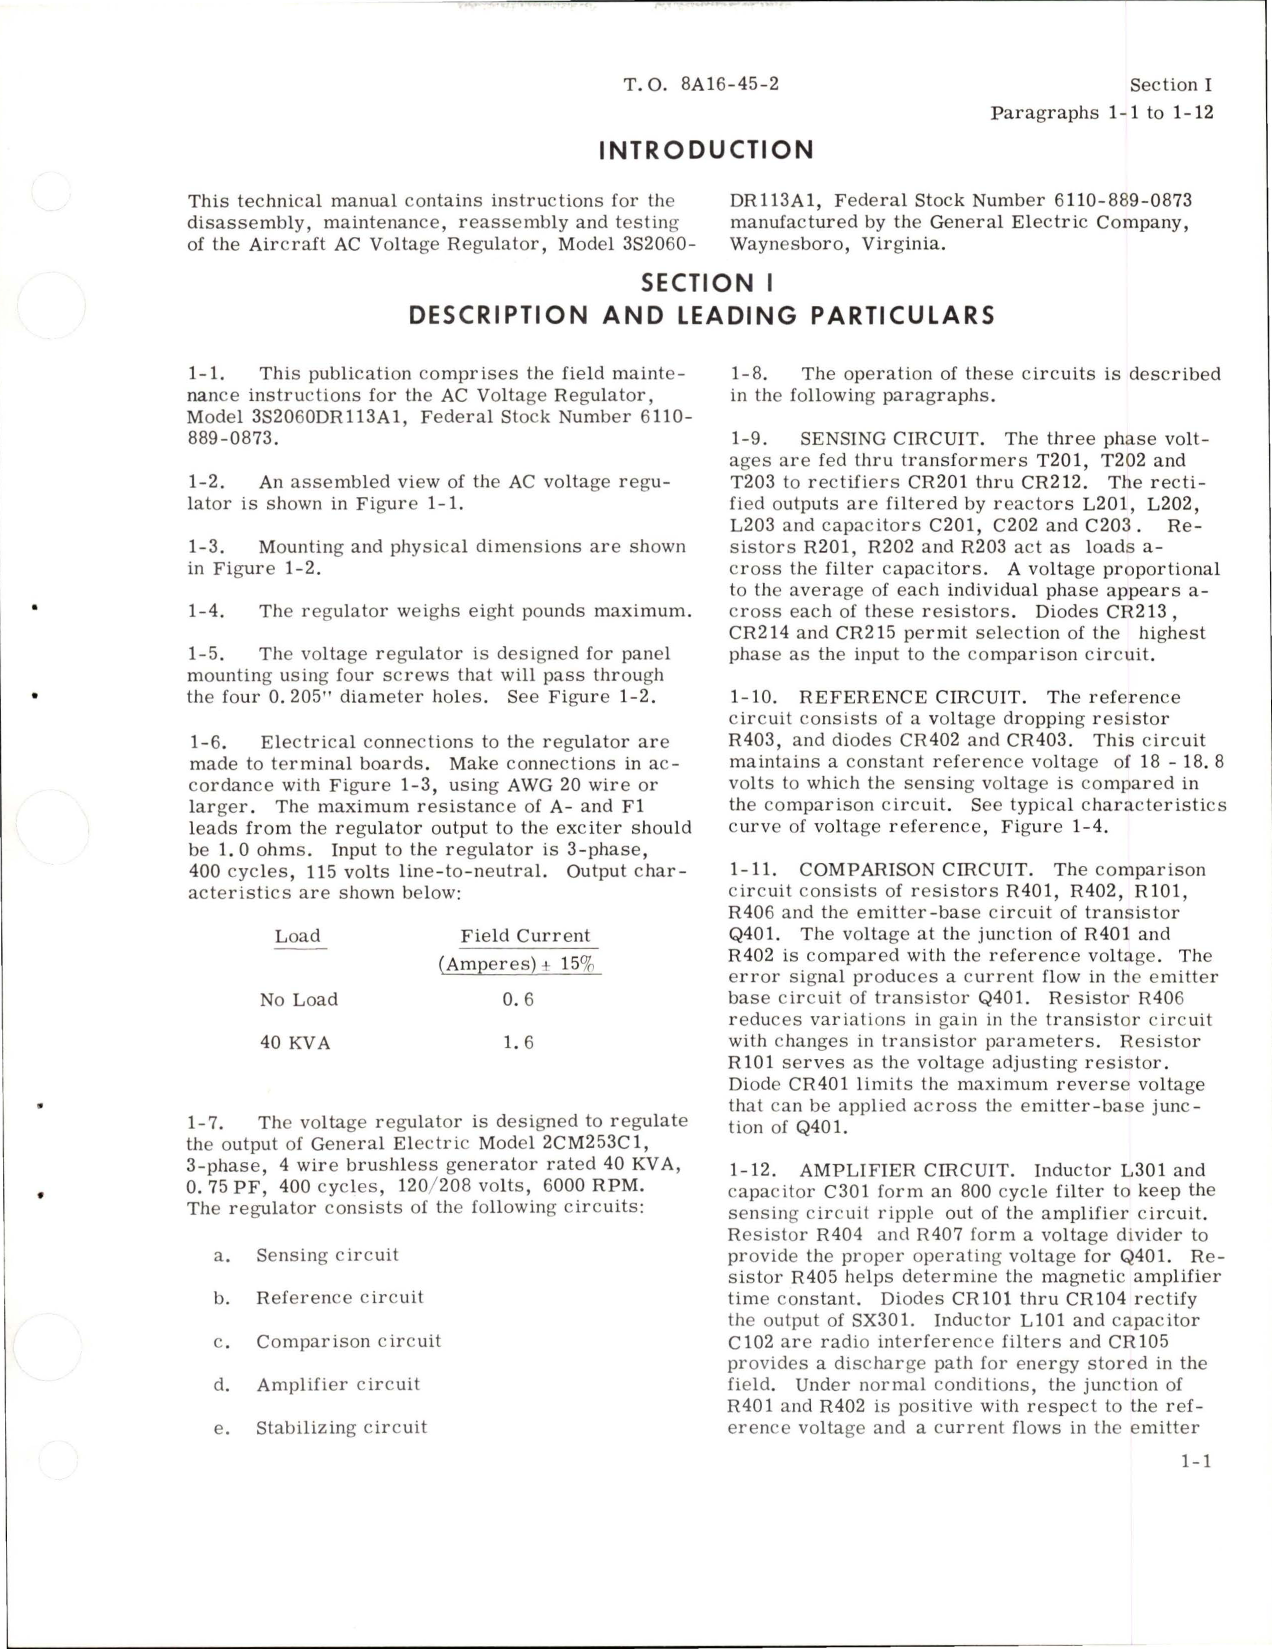 Sample page 5 from AirCorps Library document: Maintenance Instructions for AC Voltage Regulator - Model 3S2060DR113A1